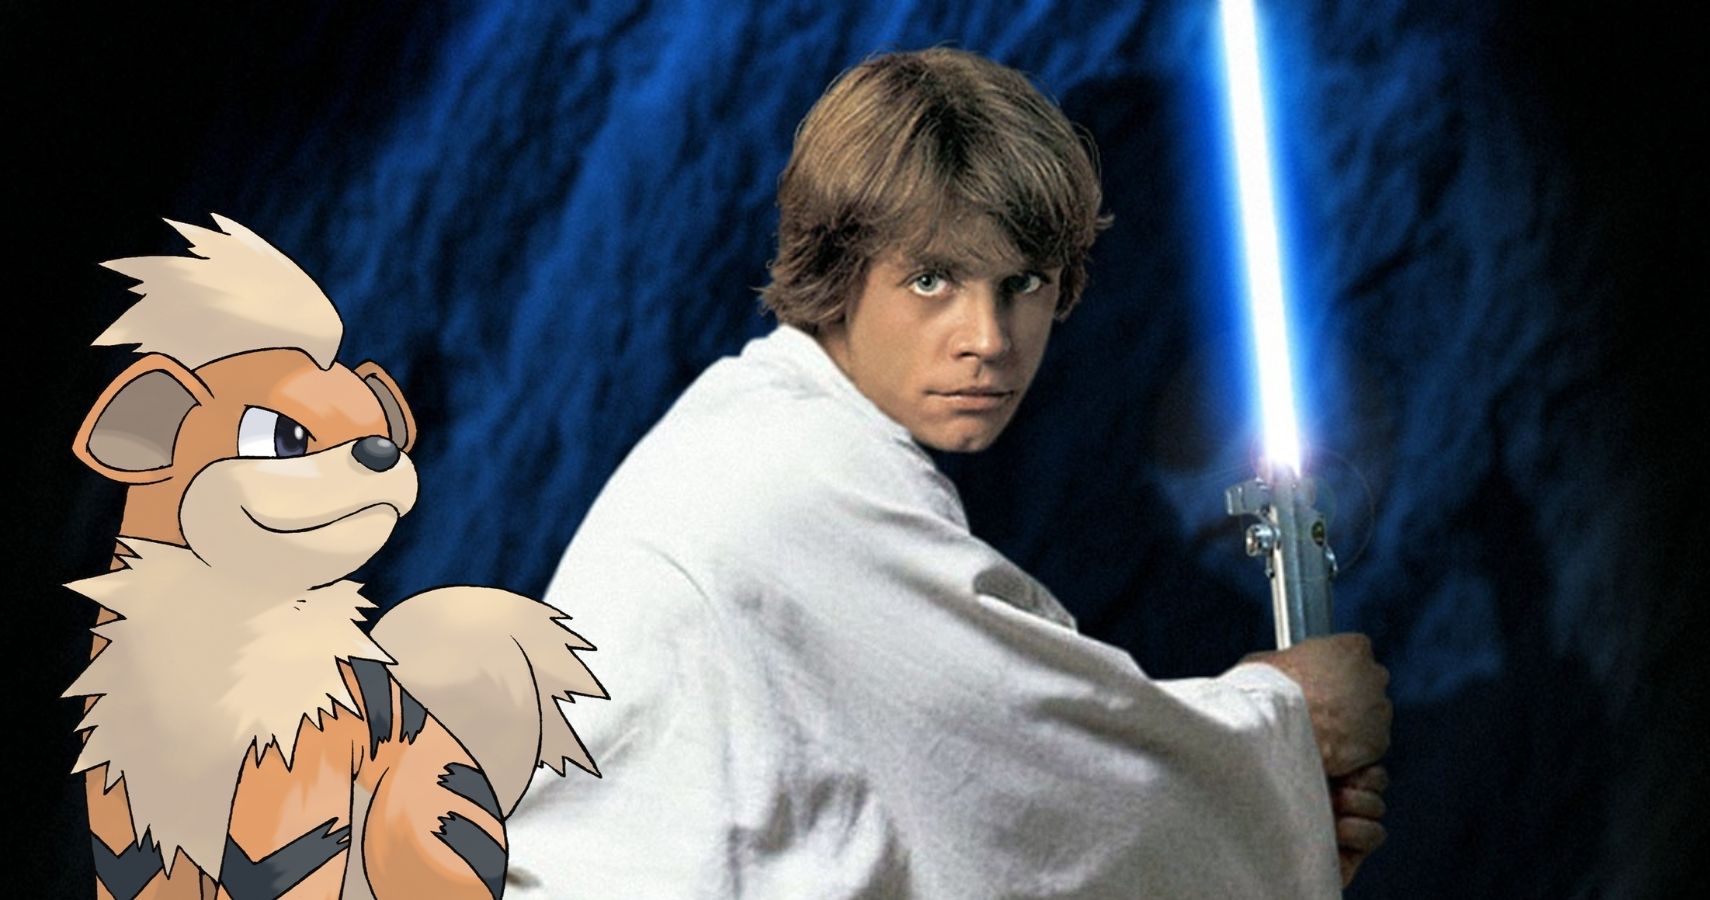 Luke holds his lightsaber and Growlithe stands next to him